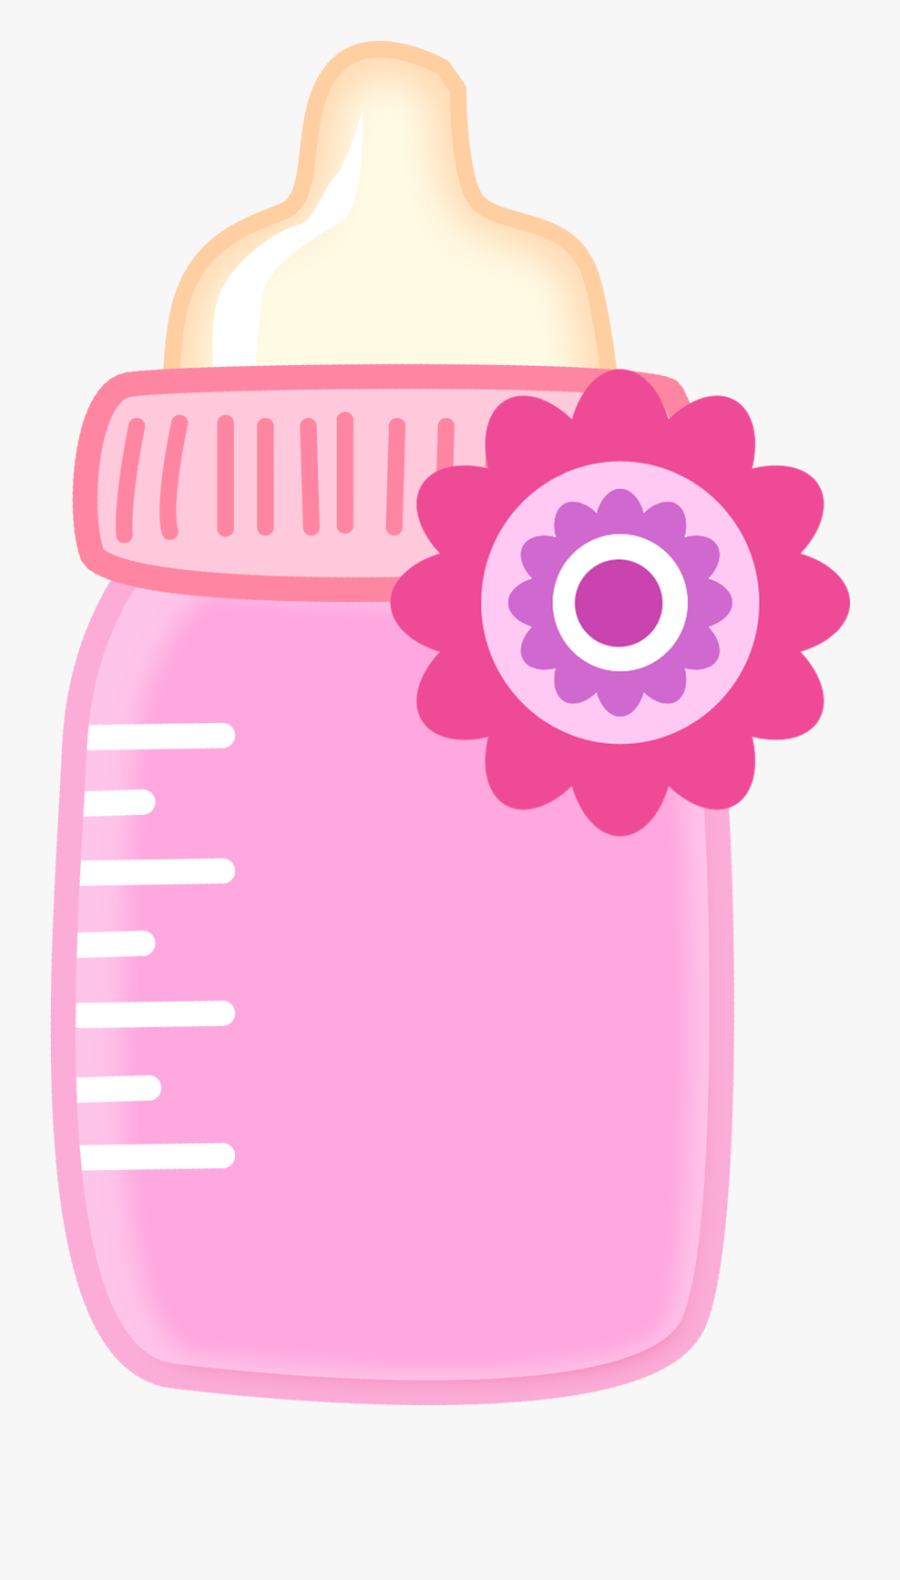 Transparent Baby Bottle Clipart - Girl Baby Bottle Clipart, Transparent Clipart